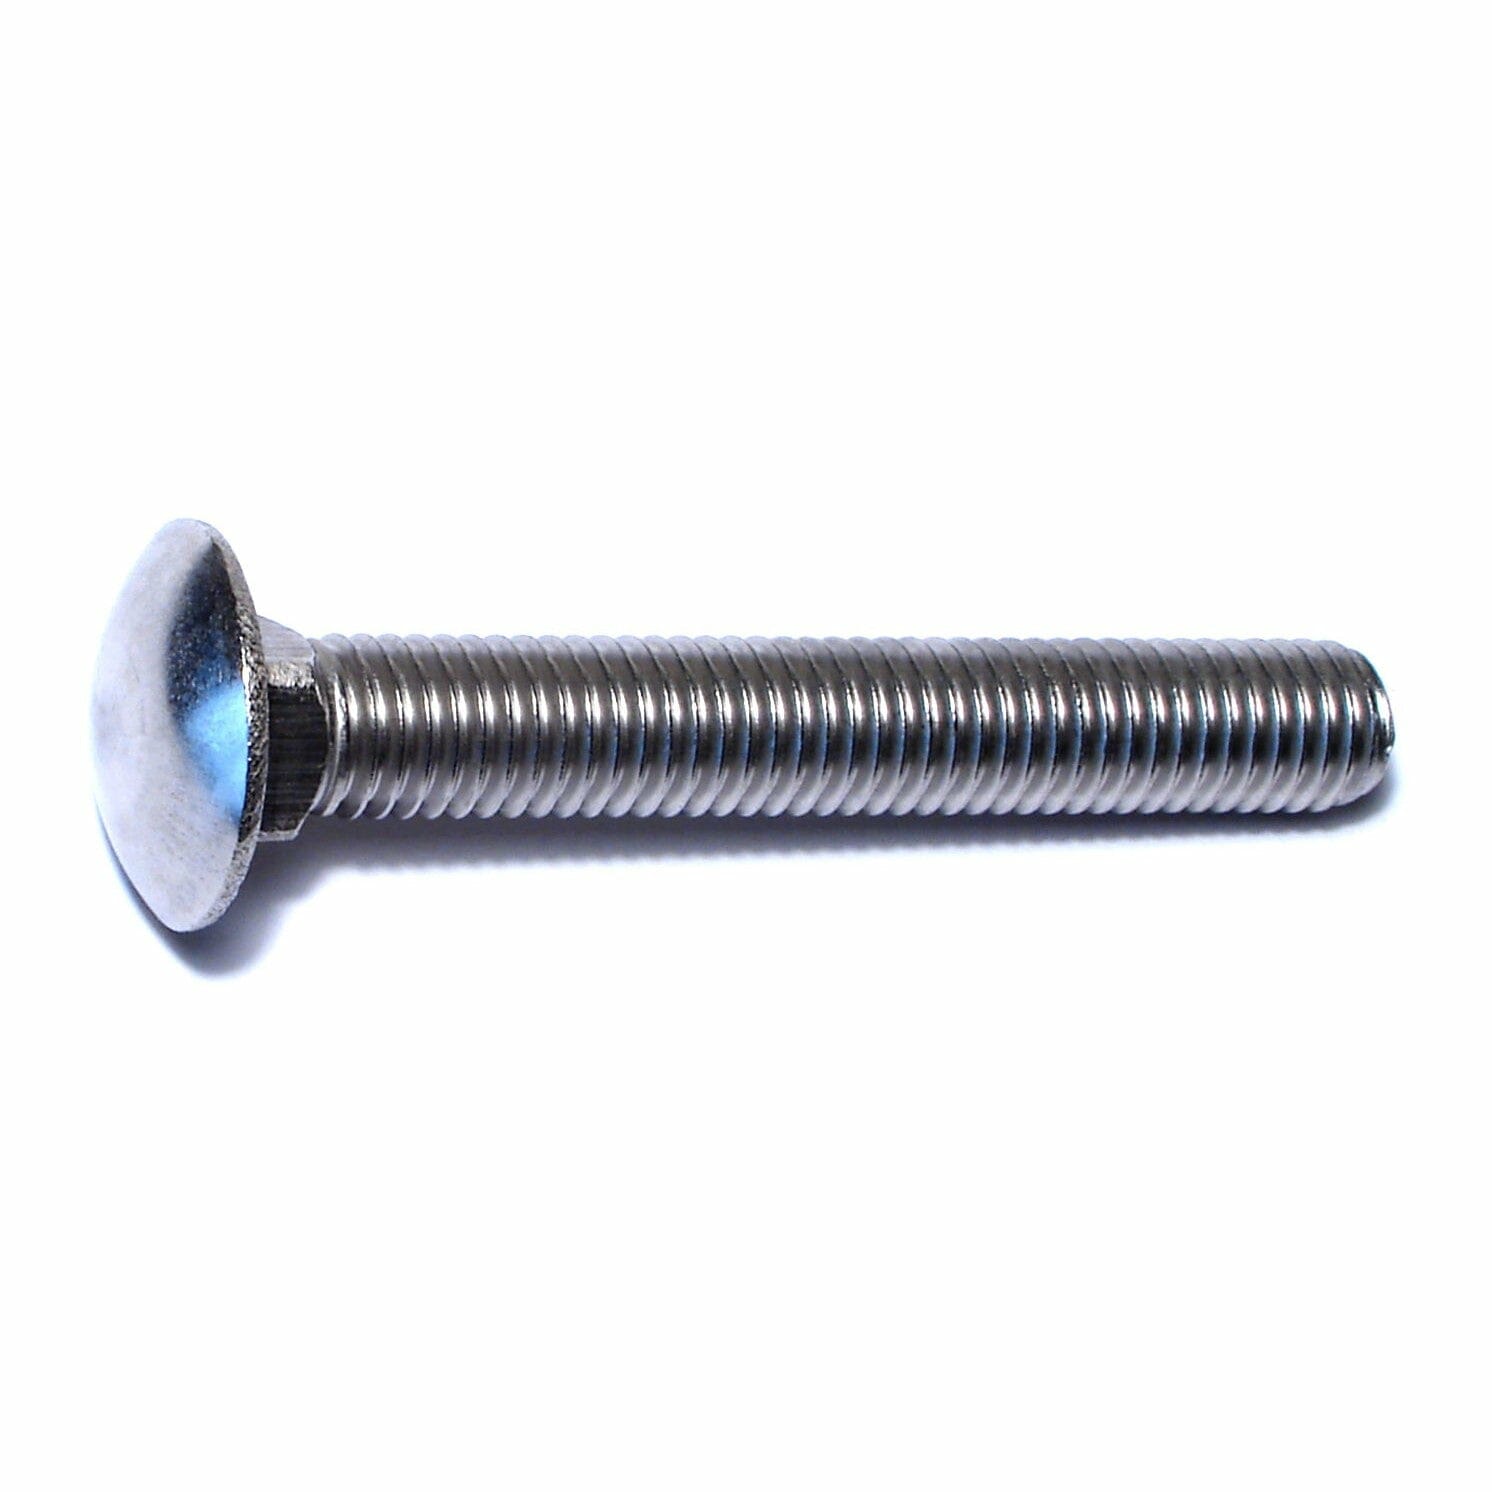 Fasteners, Bolts,1/2″-13 x 3-1/2″, Carriage Bolts